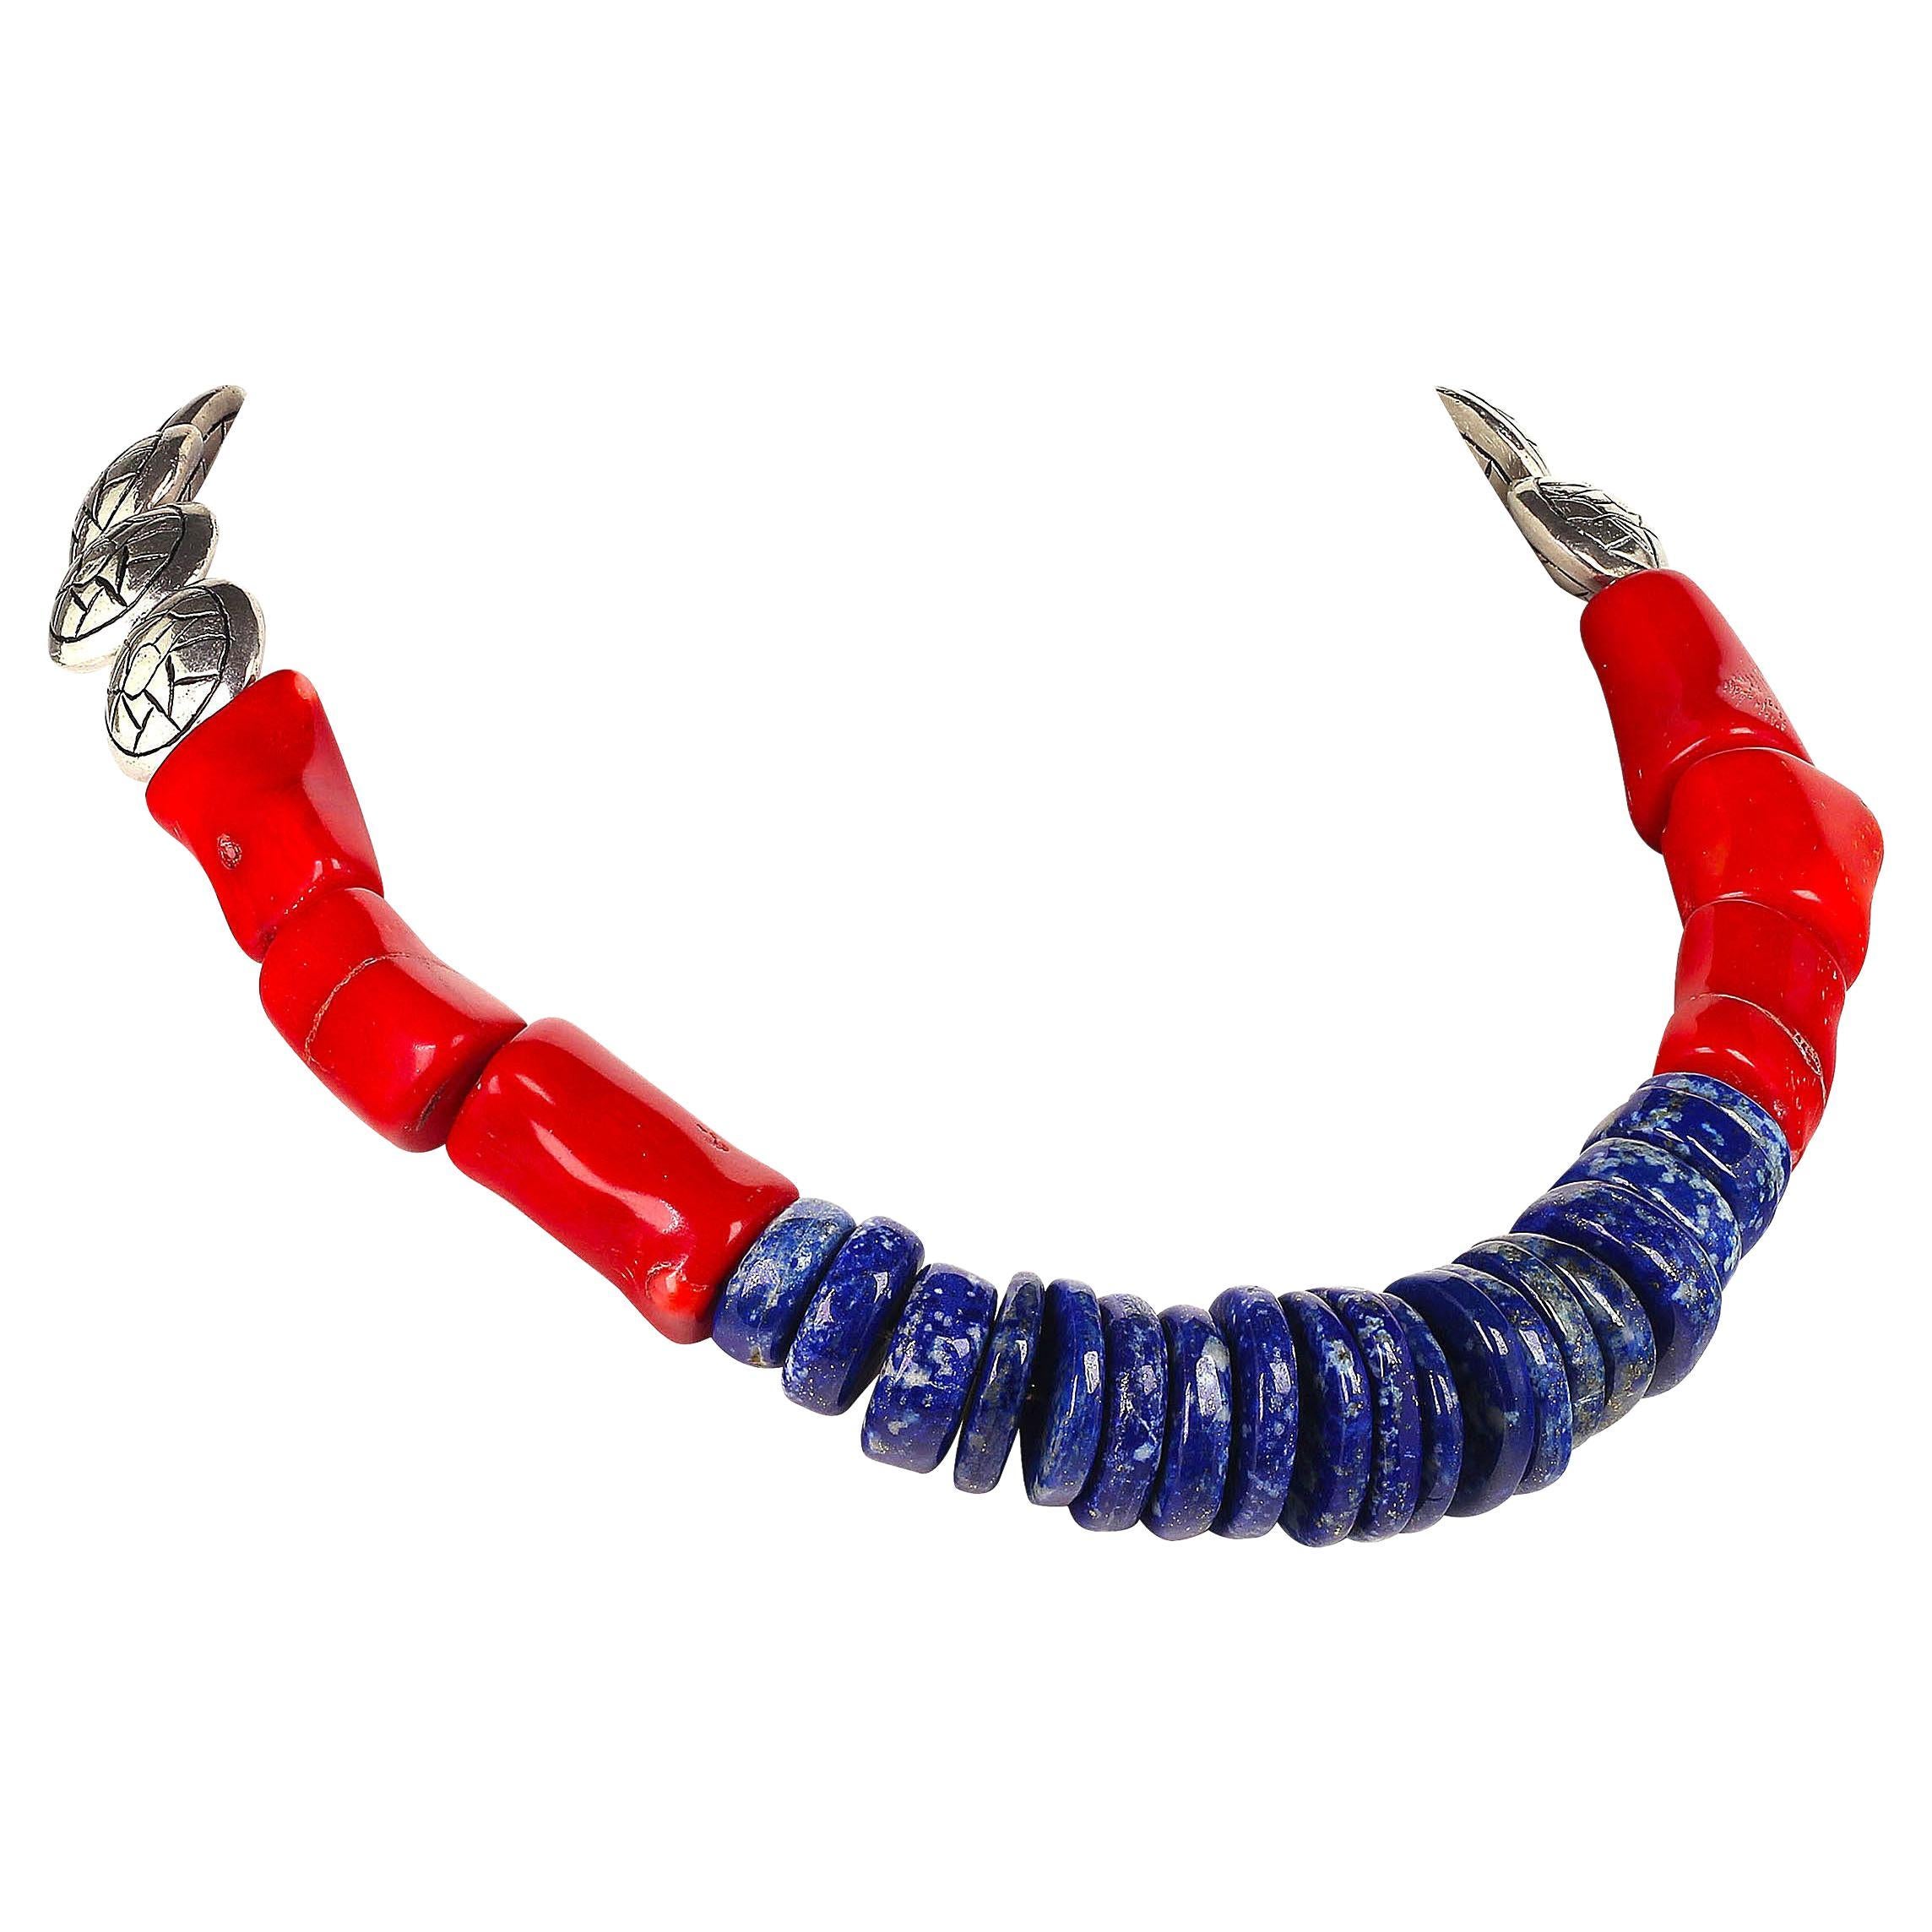 AJD Stunning Lapis Lazuli, Coral and Silver Necklace